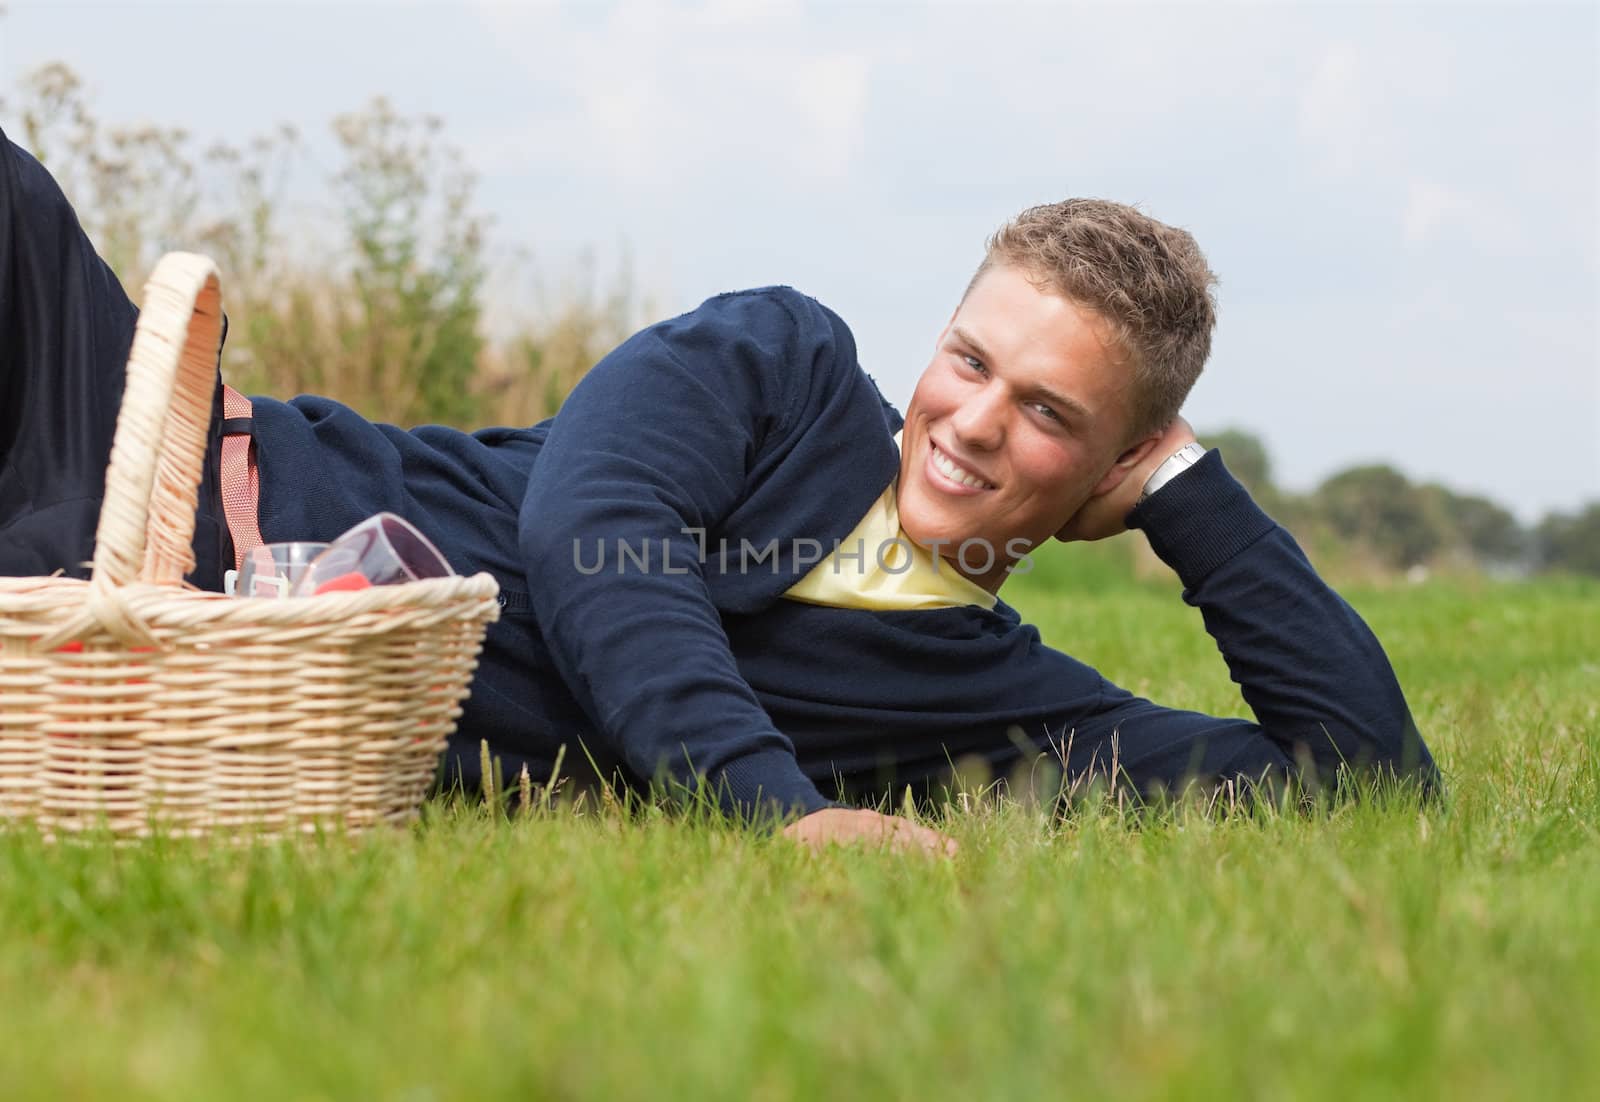 Young handsome blond lying on the grass with picnic basket